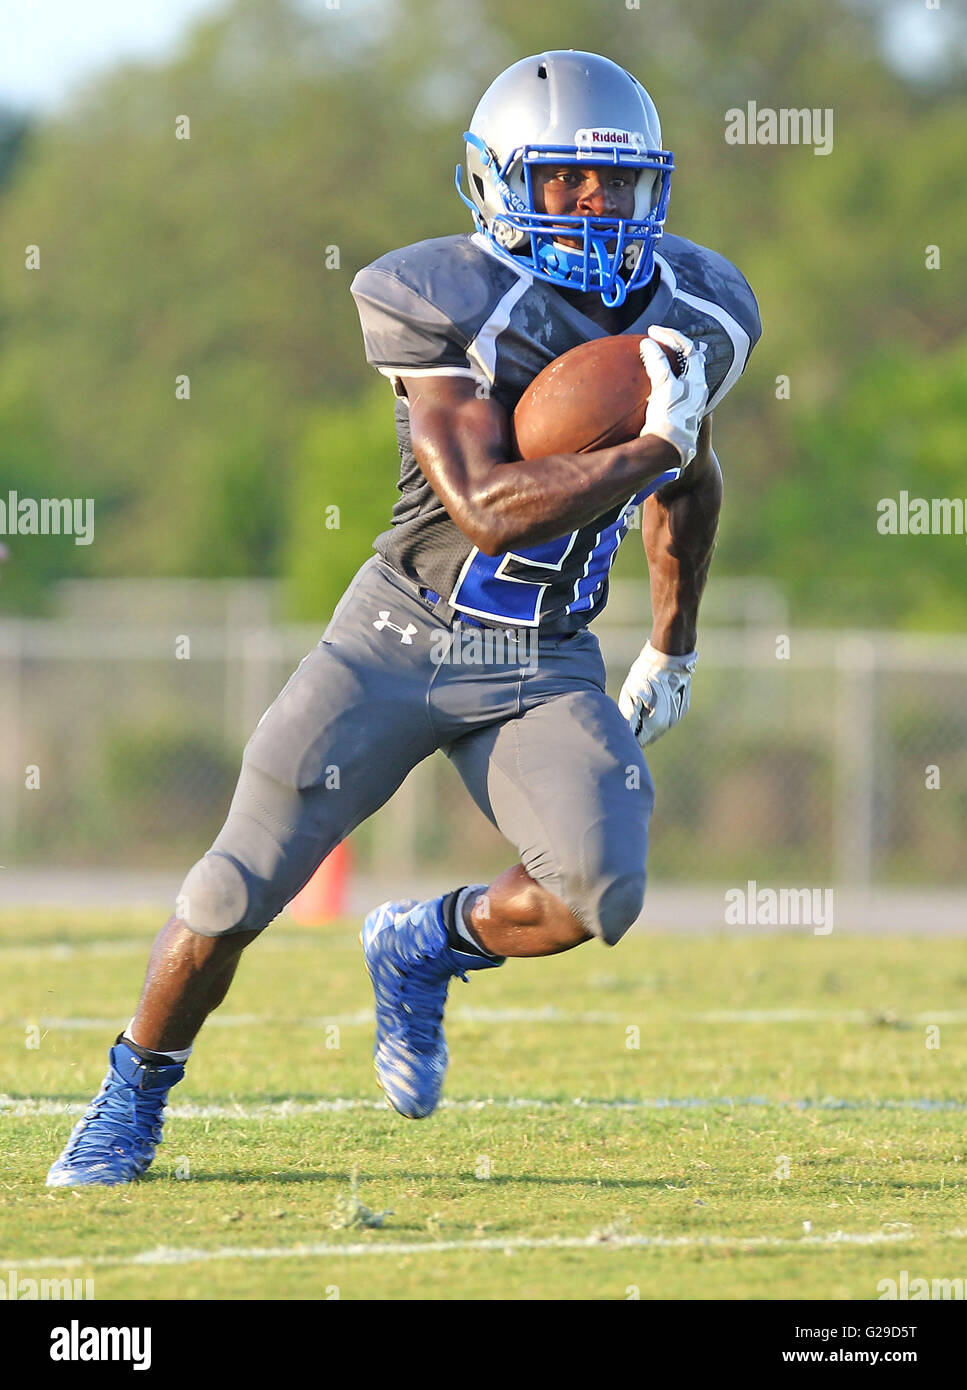 Spring Hill, Florida, USA. 19th May, 2016. BRENDAN FITTERER | Times.Anclote RB Braxton Johnson (21) runs the ball vs. Springstead during spring football at Anclote High School Thursday (5/19/16) evening. © Brendan Fitterer/Tampa Bay Times/ZUMA Wire/Alamy Live News Stock Photo